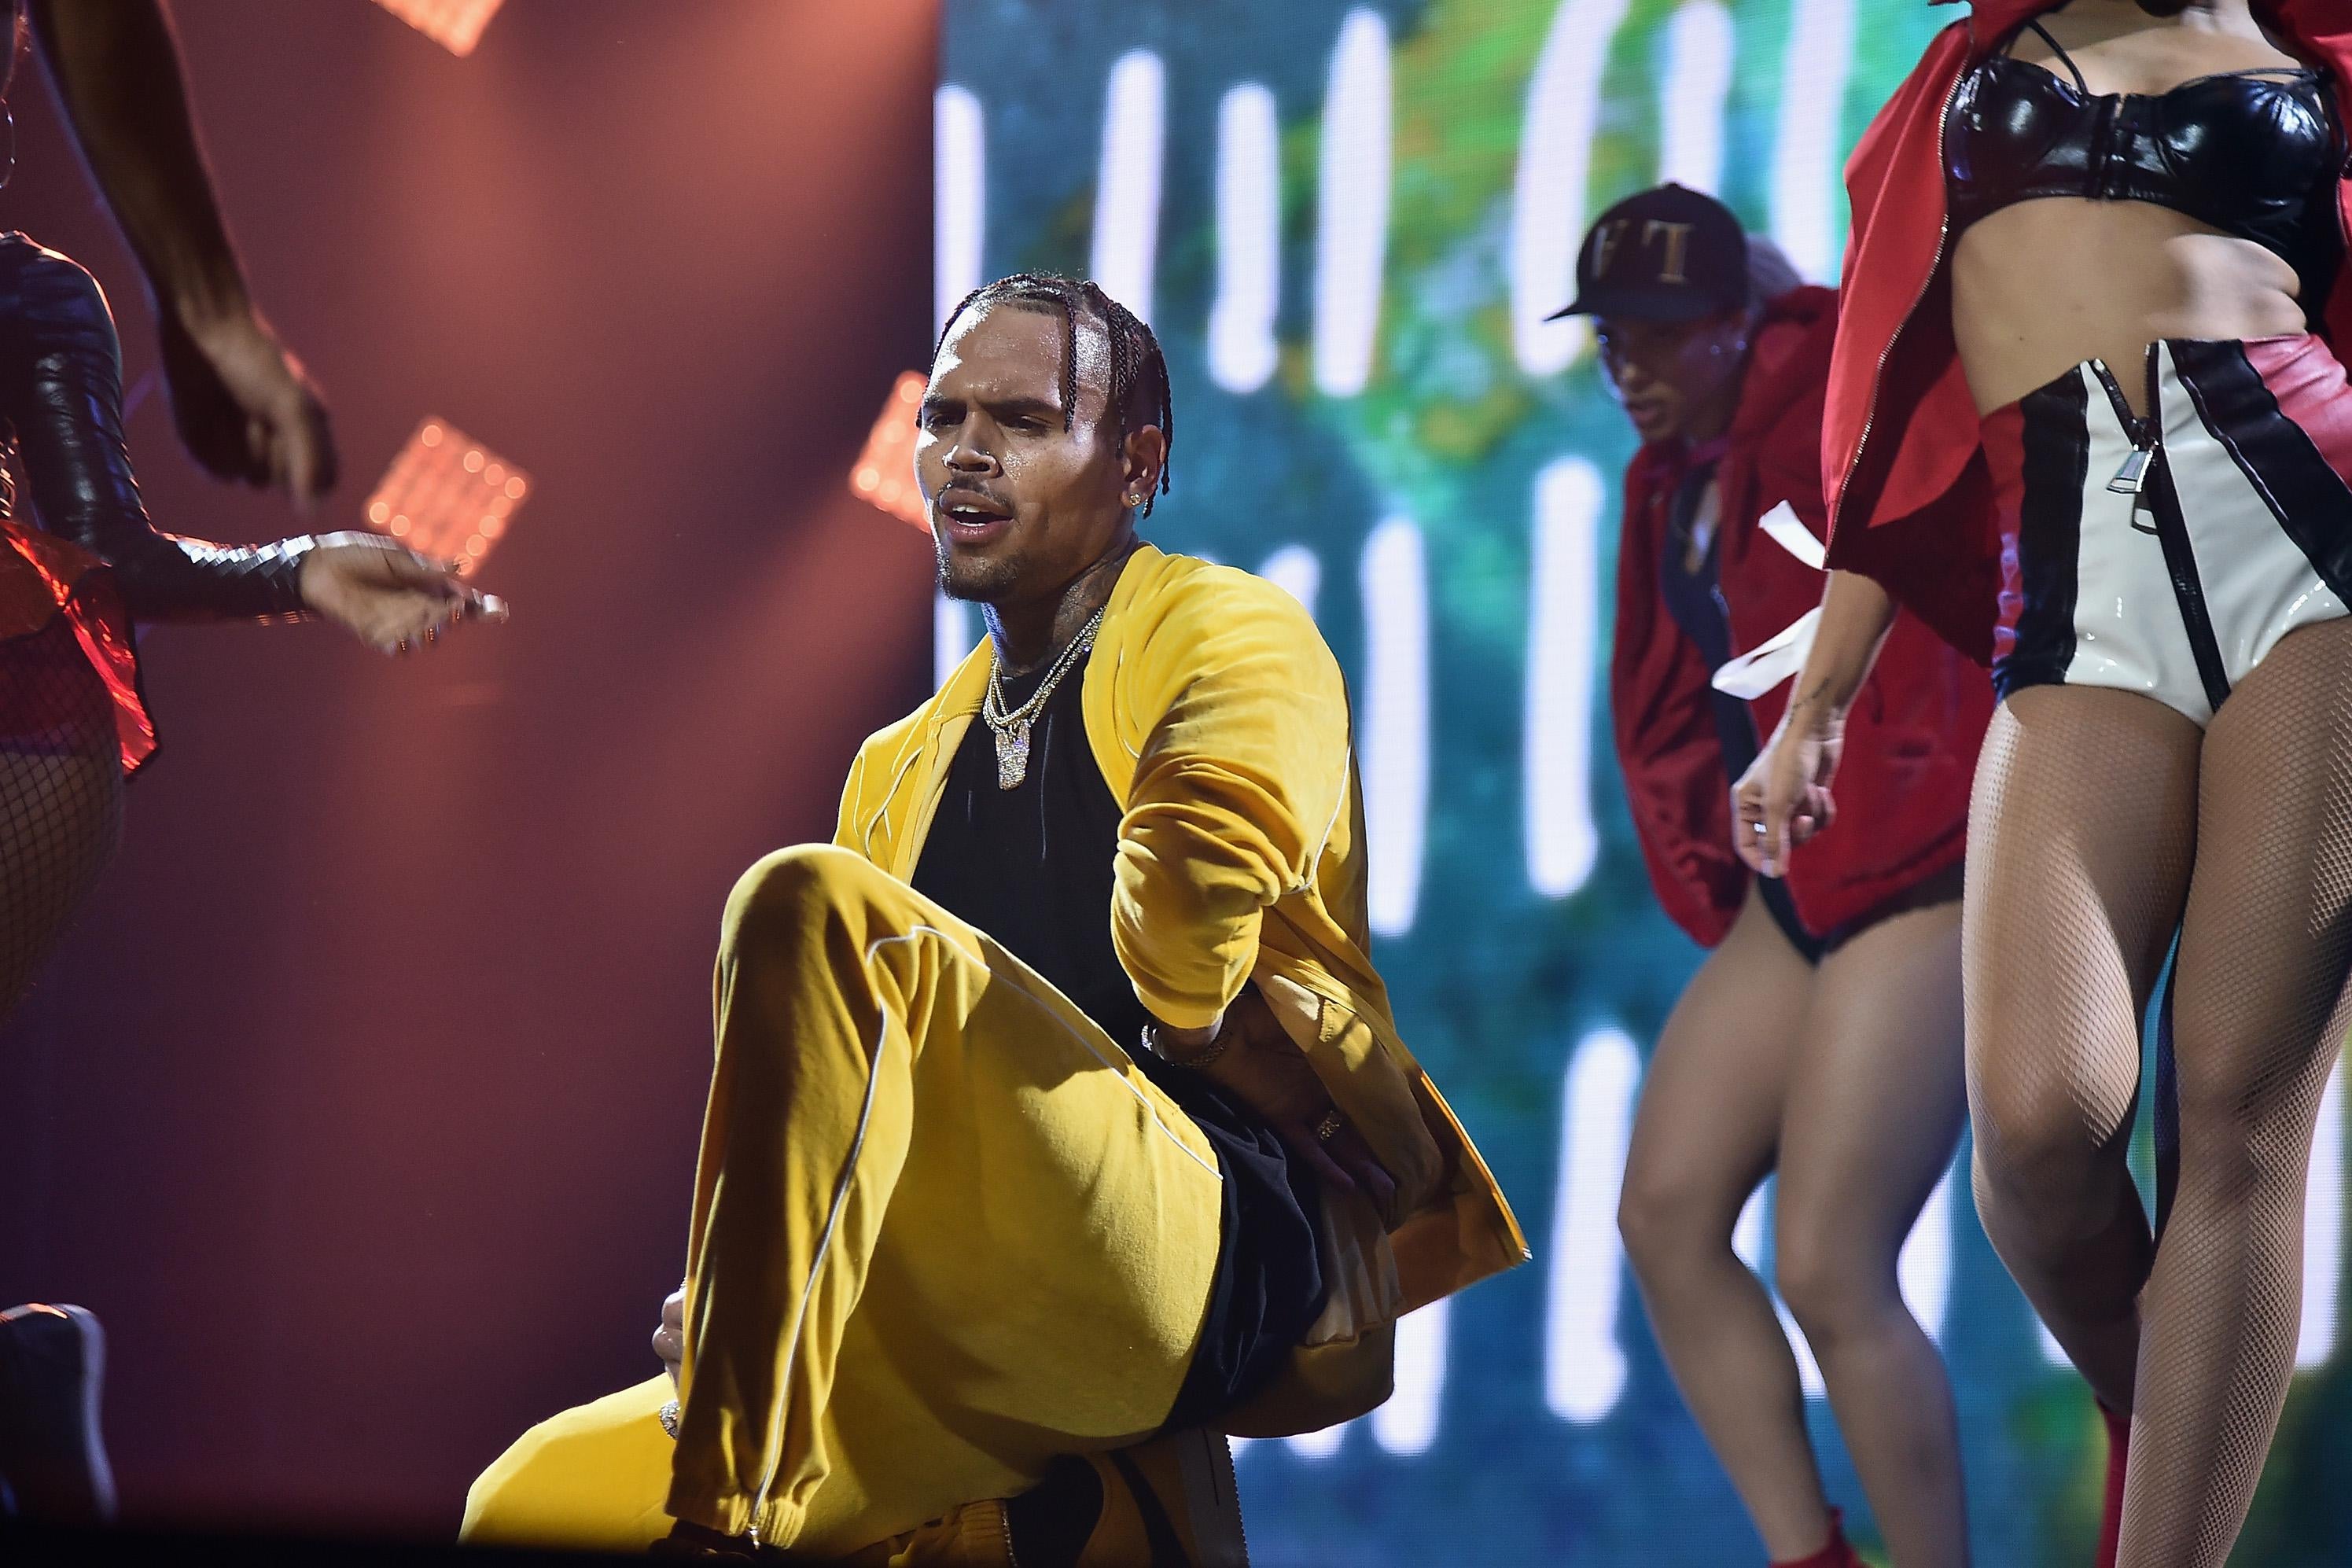 NEW YORK, NY - OCTOBER 17:  Chris Brown performs onstage during TIDAL X: Brooklyn at Barclays Center of Brooklyn on October 17, 2017 in New York City.  (Photo by Theo Wargo/Getty Images for TIDAL)